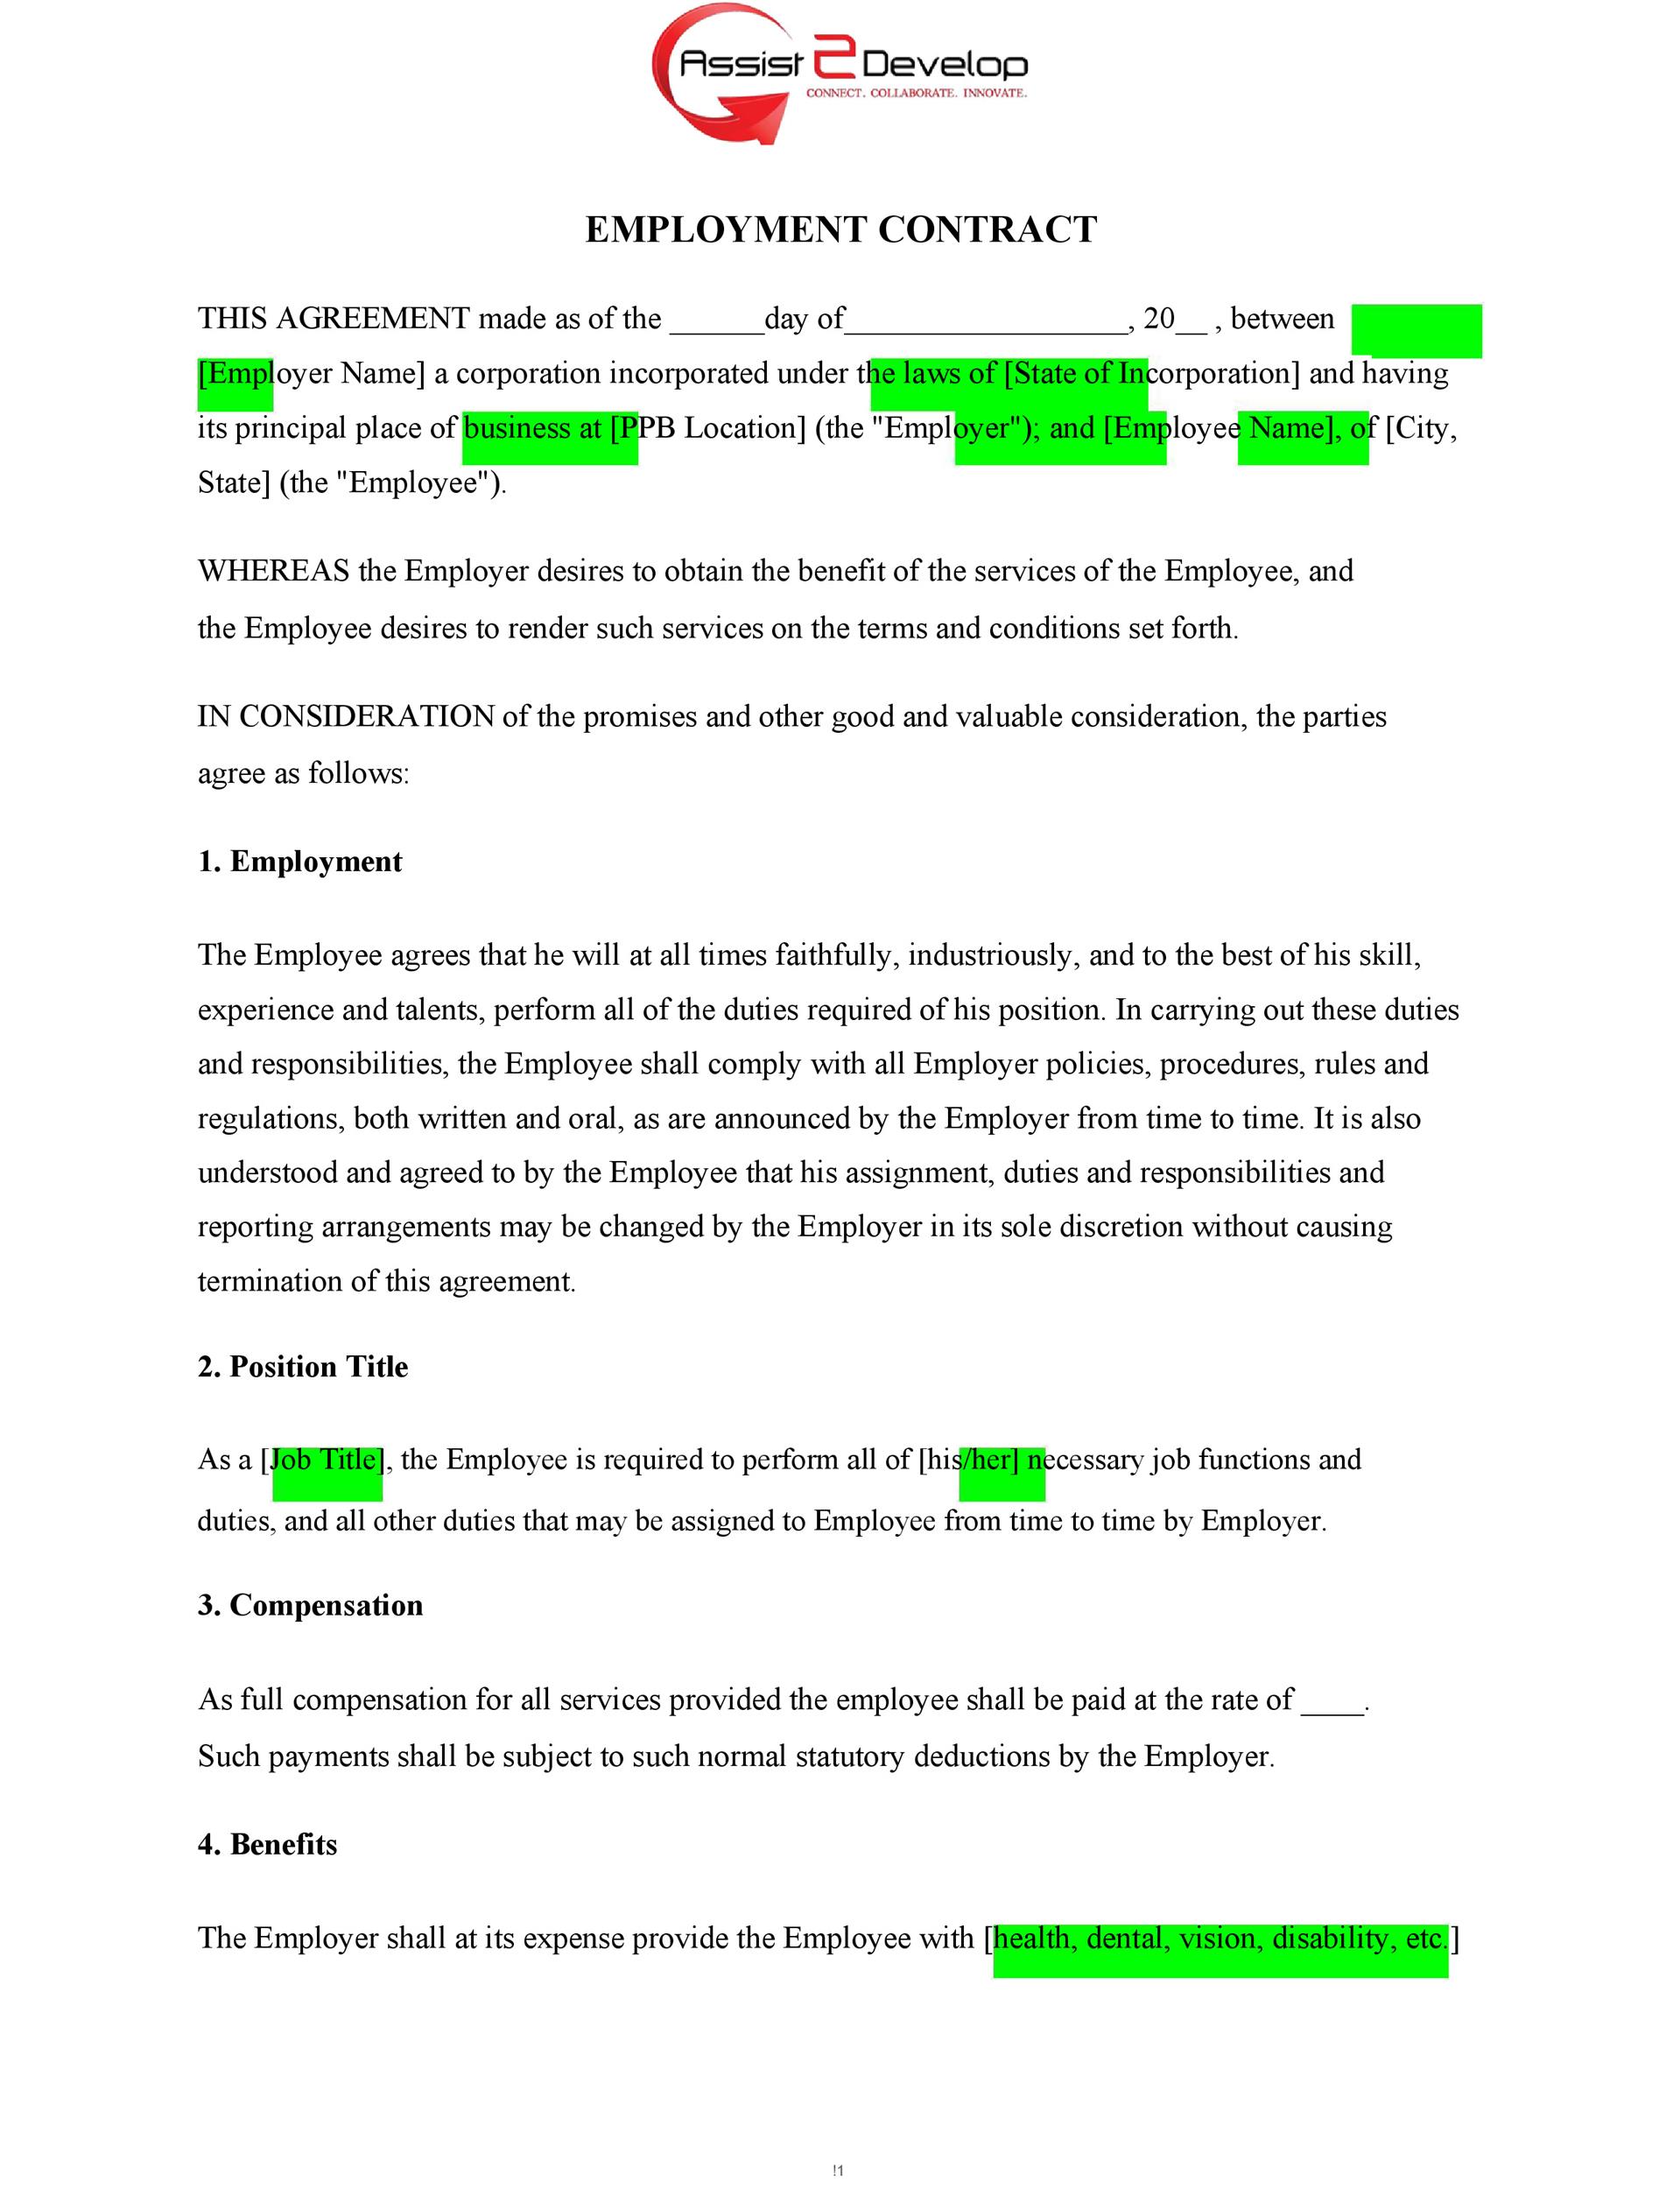 50 Readytouse Employment Contracts (Samples & Templates) ᐅ